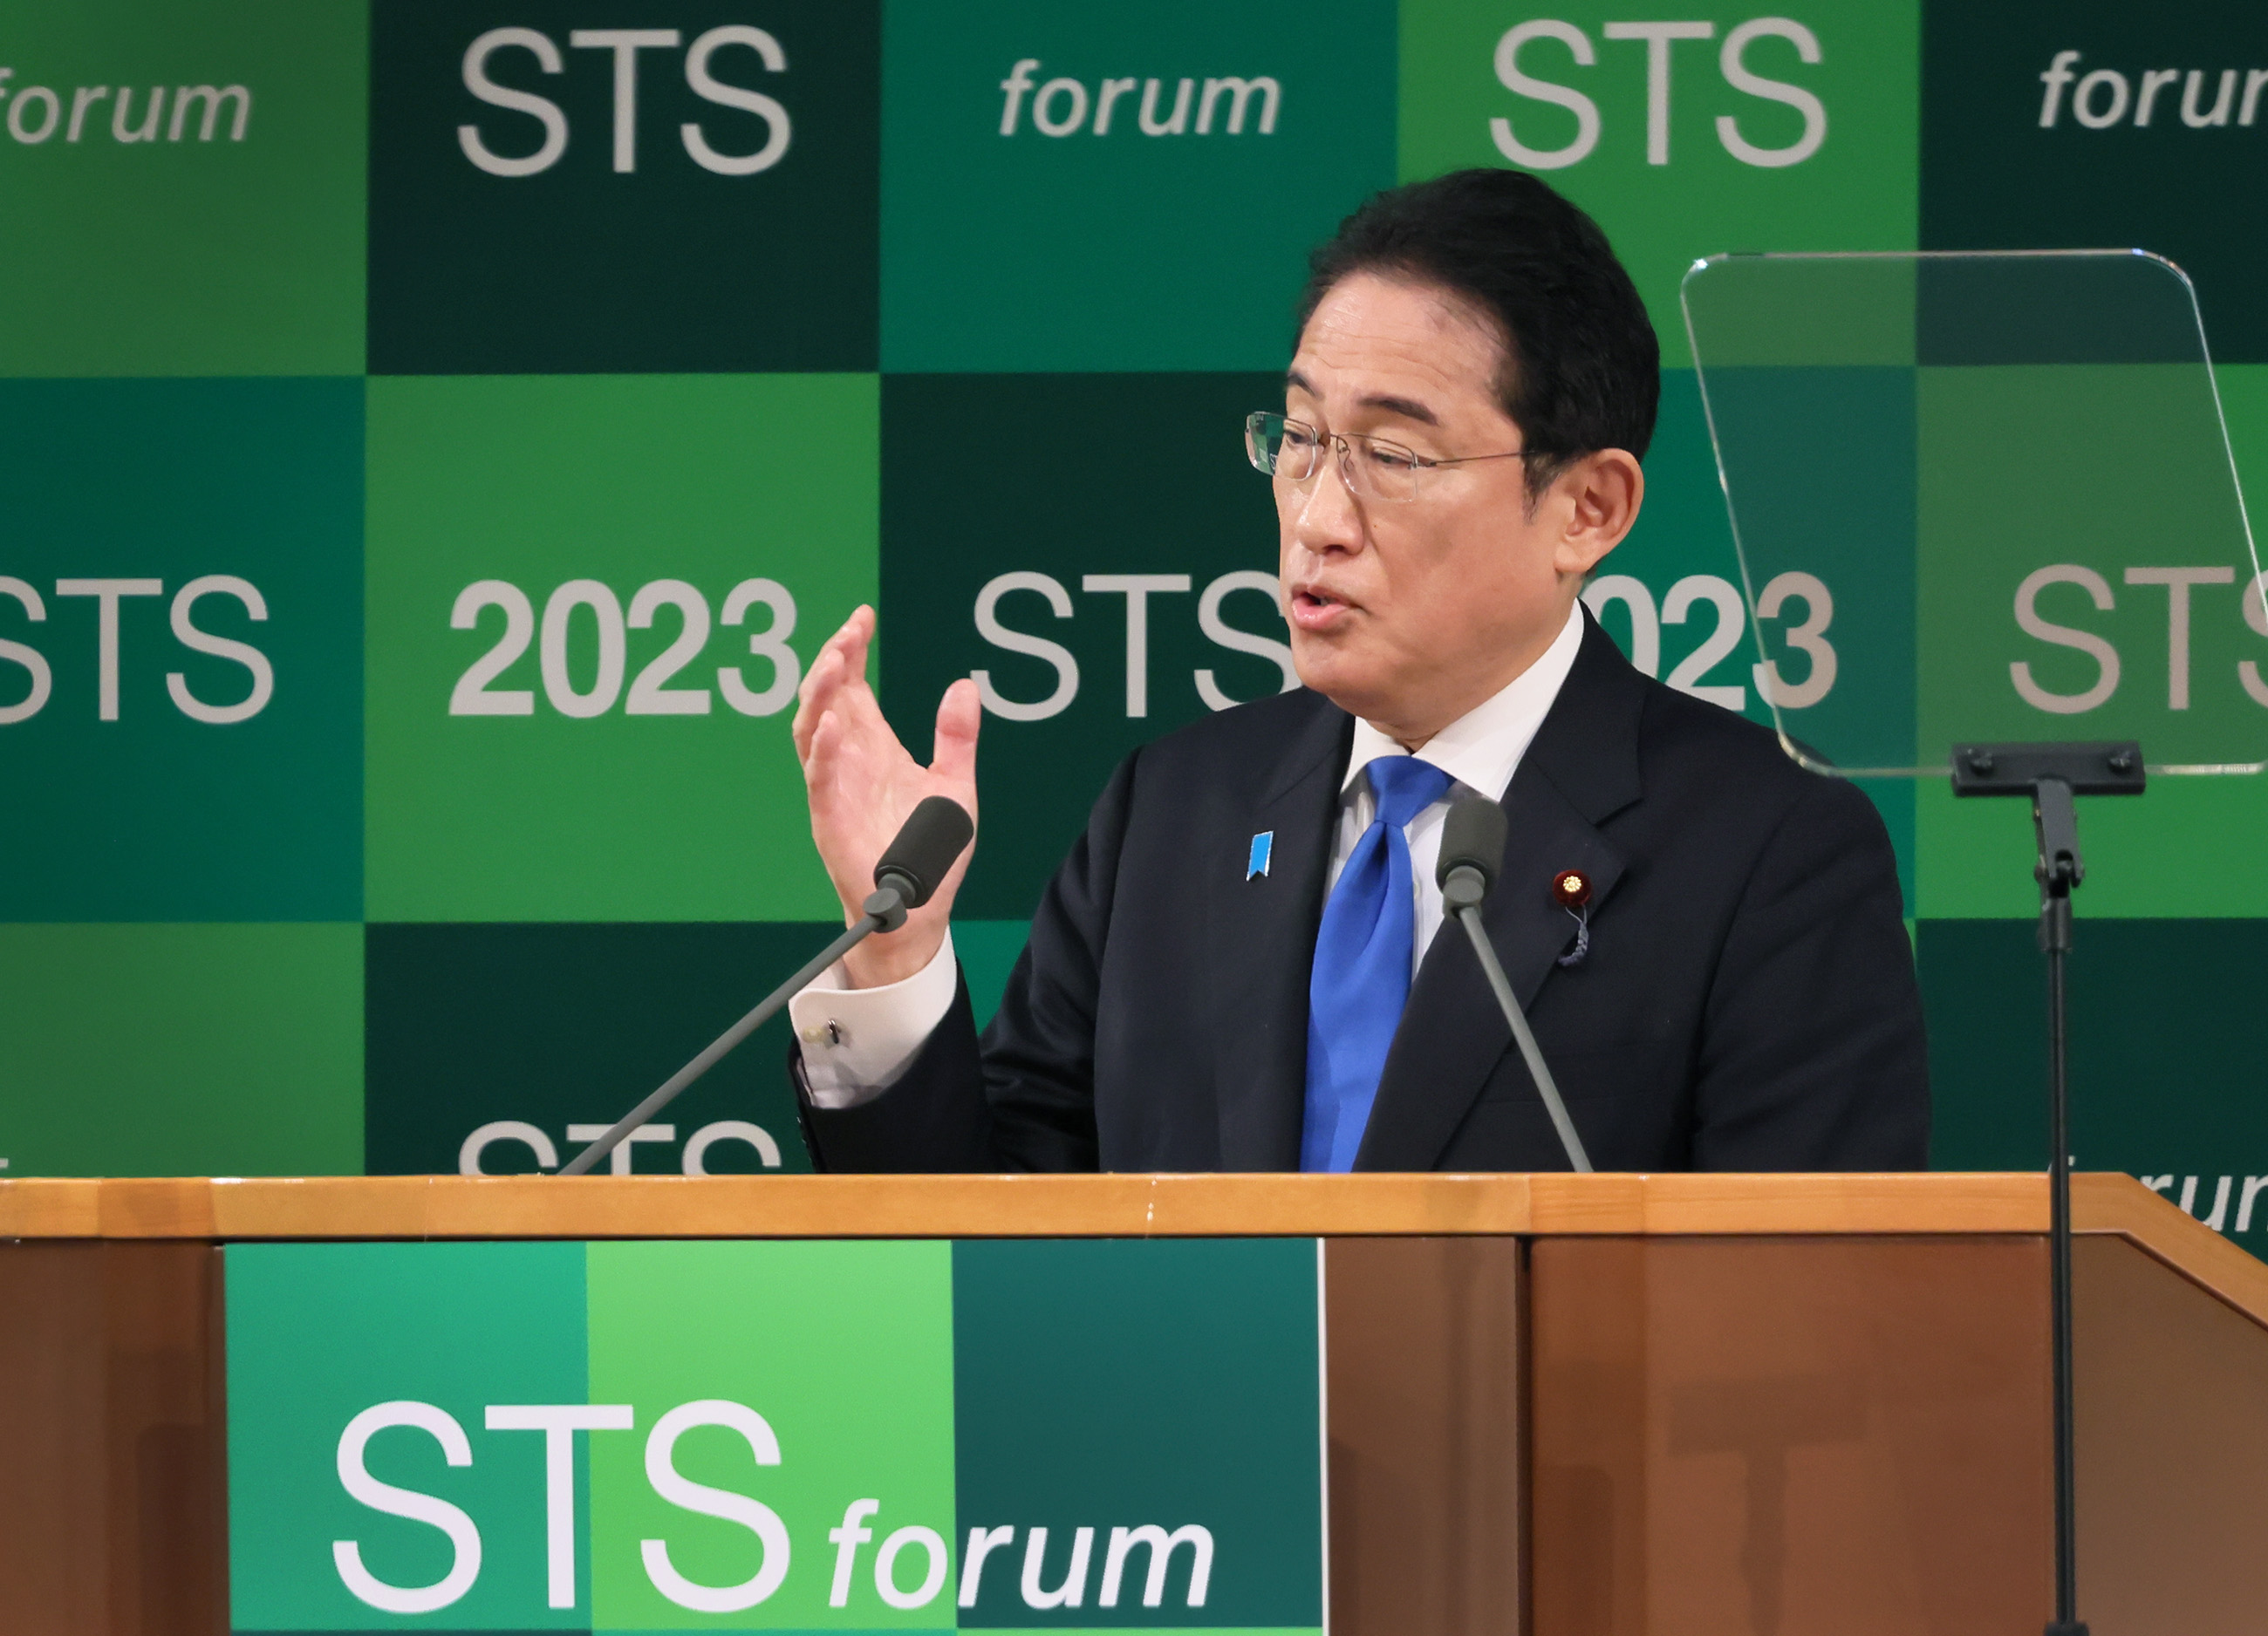 Prime Minister Kishida delivering an address at the opening ceremony (1)